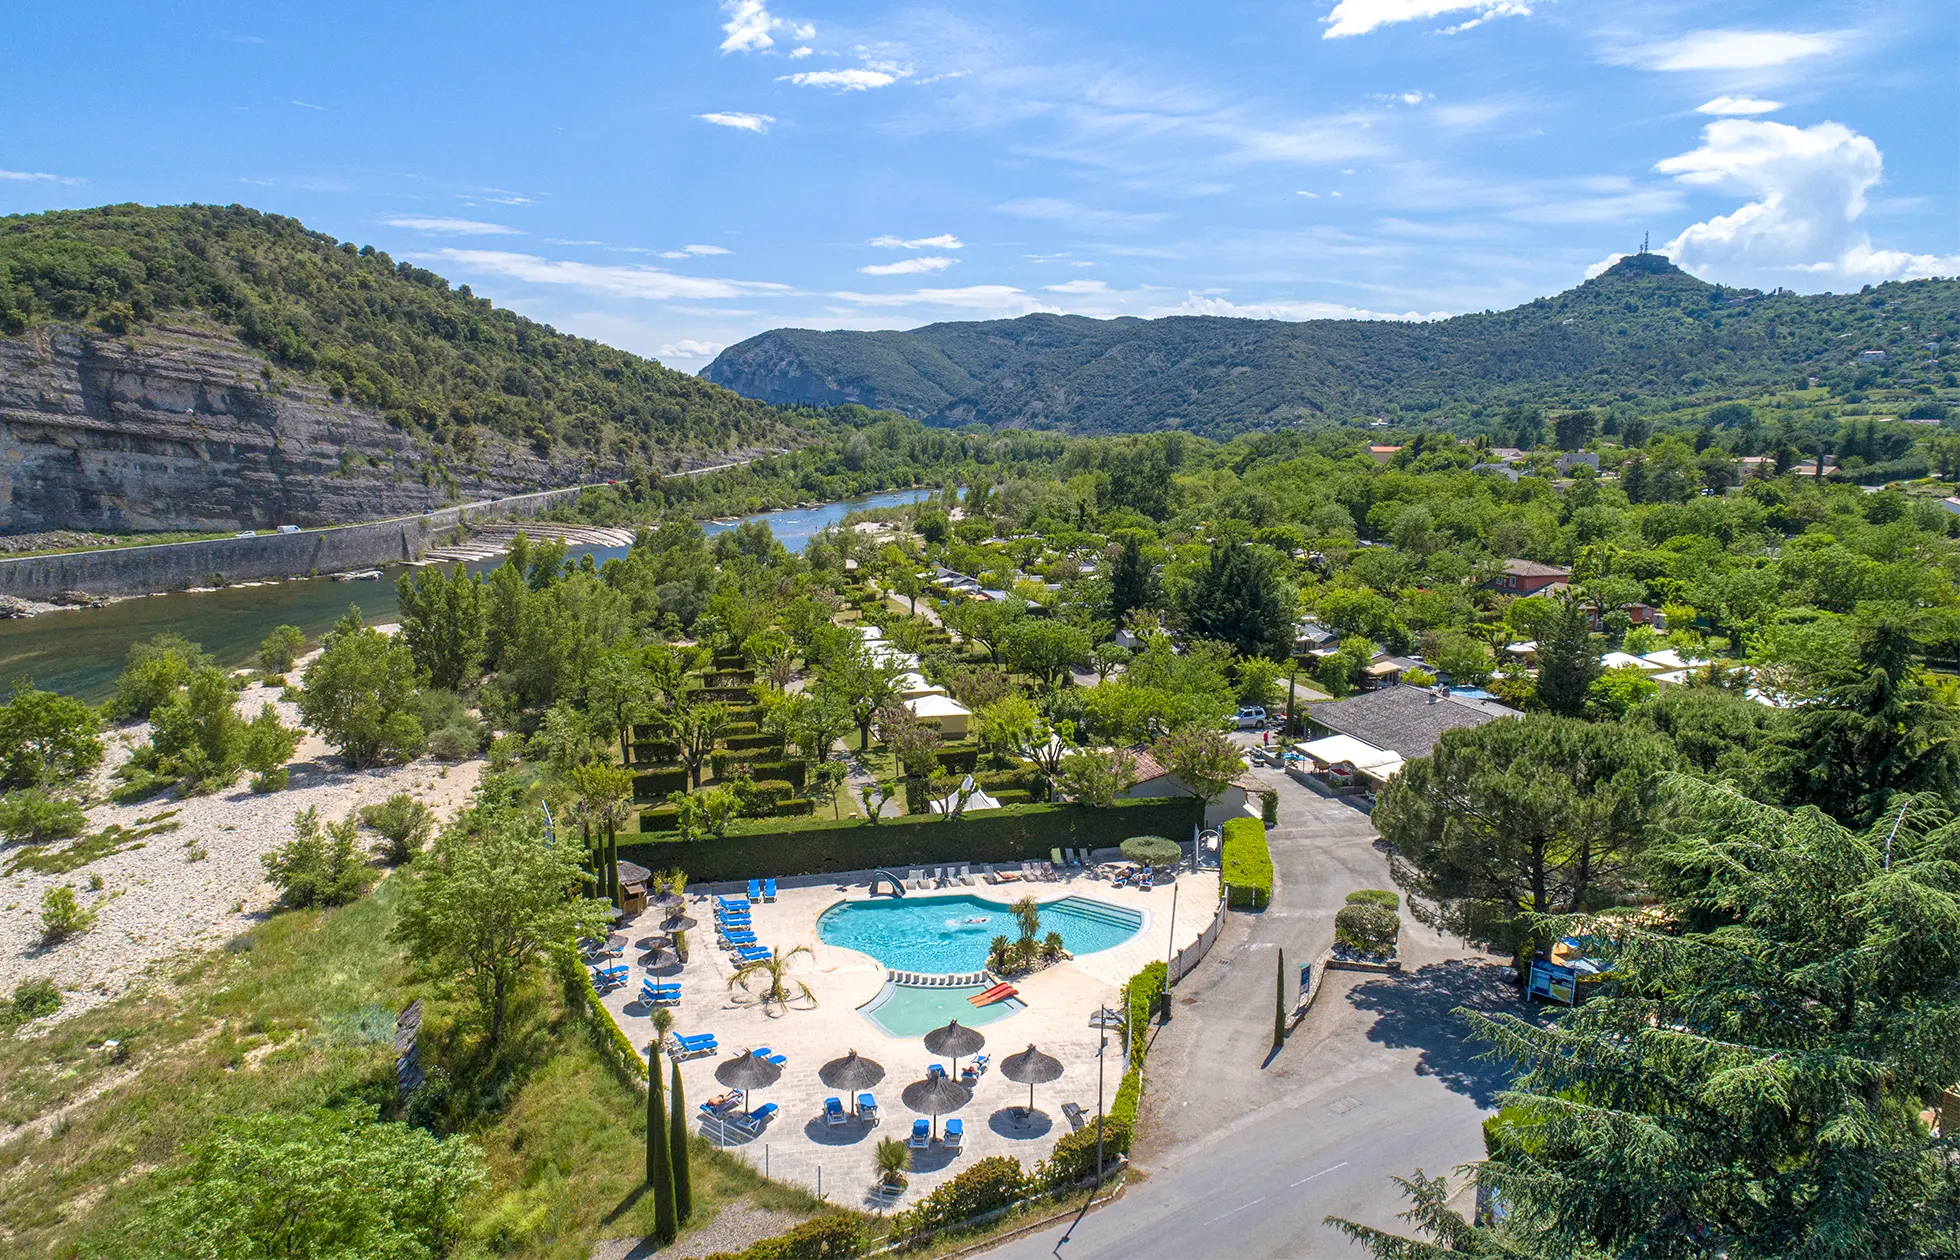 Angebot ' - '02 - Camping Le Riviera - Situation